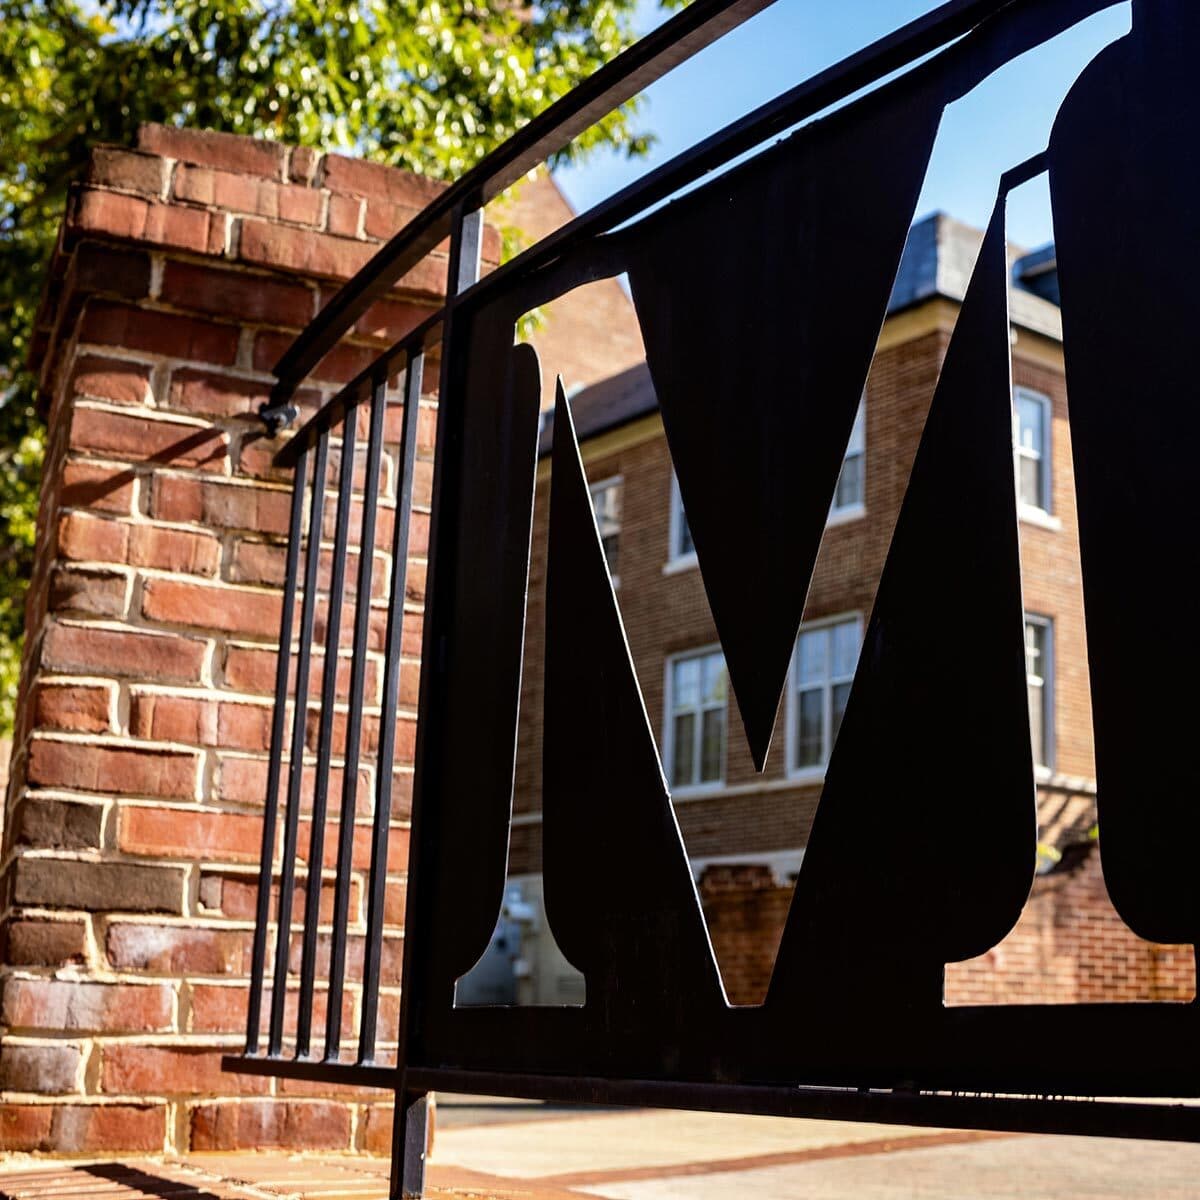 Silhouette of the Maryland M cut into a heavy dark coated metal plate set into an ornate fence